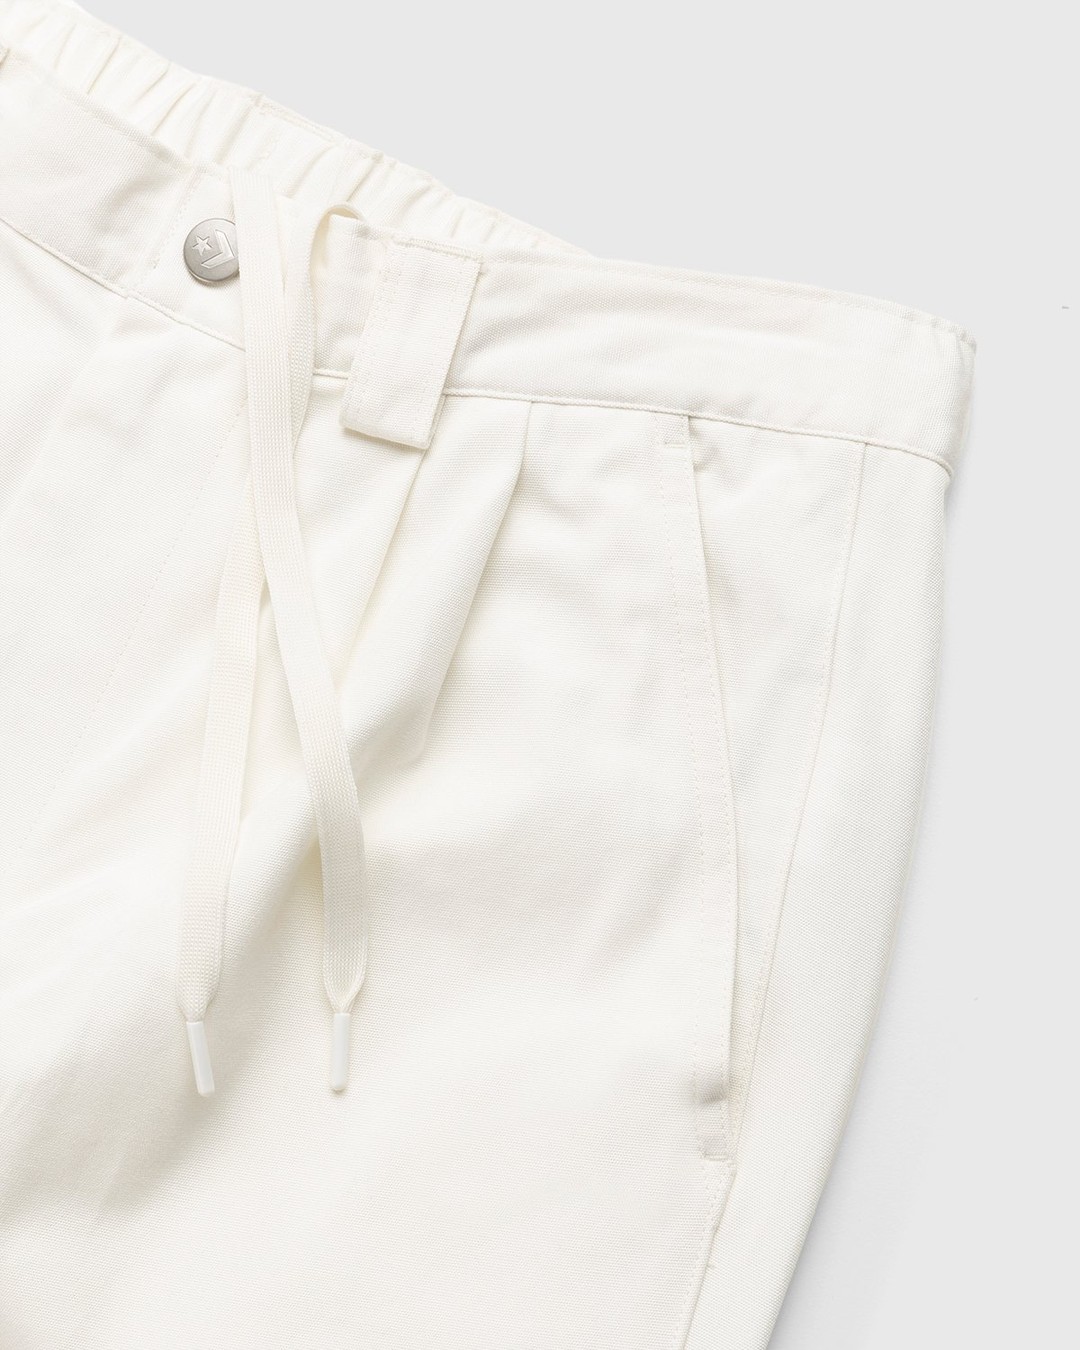 Converse – Much Love Double Pleat Chino Pant Egret - Pants - White - Image 5